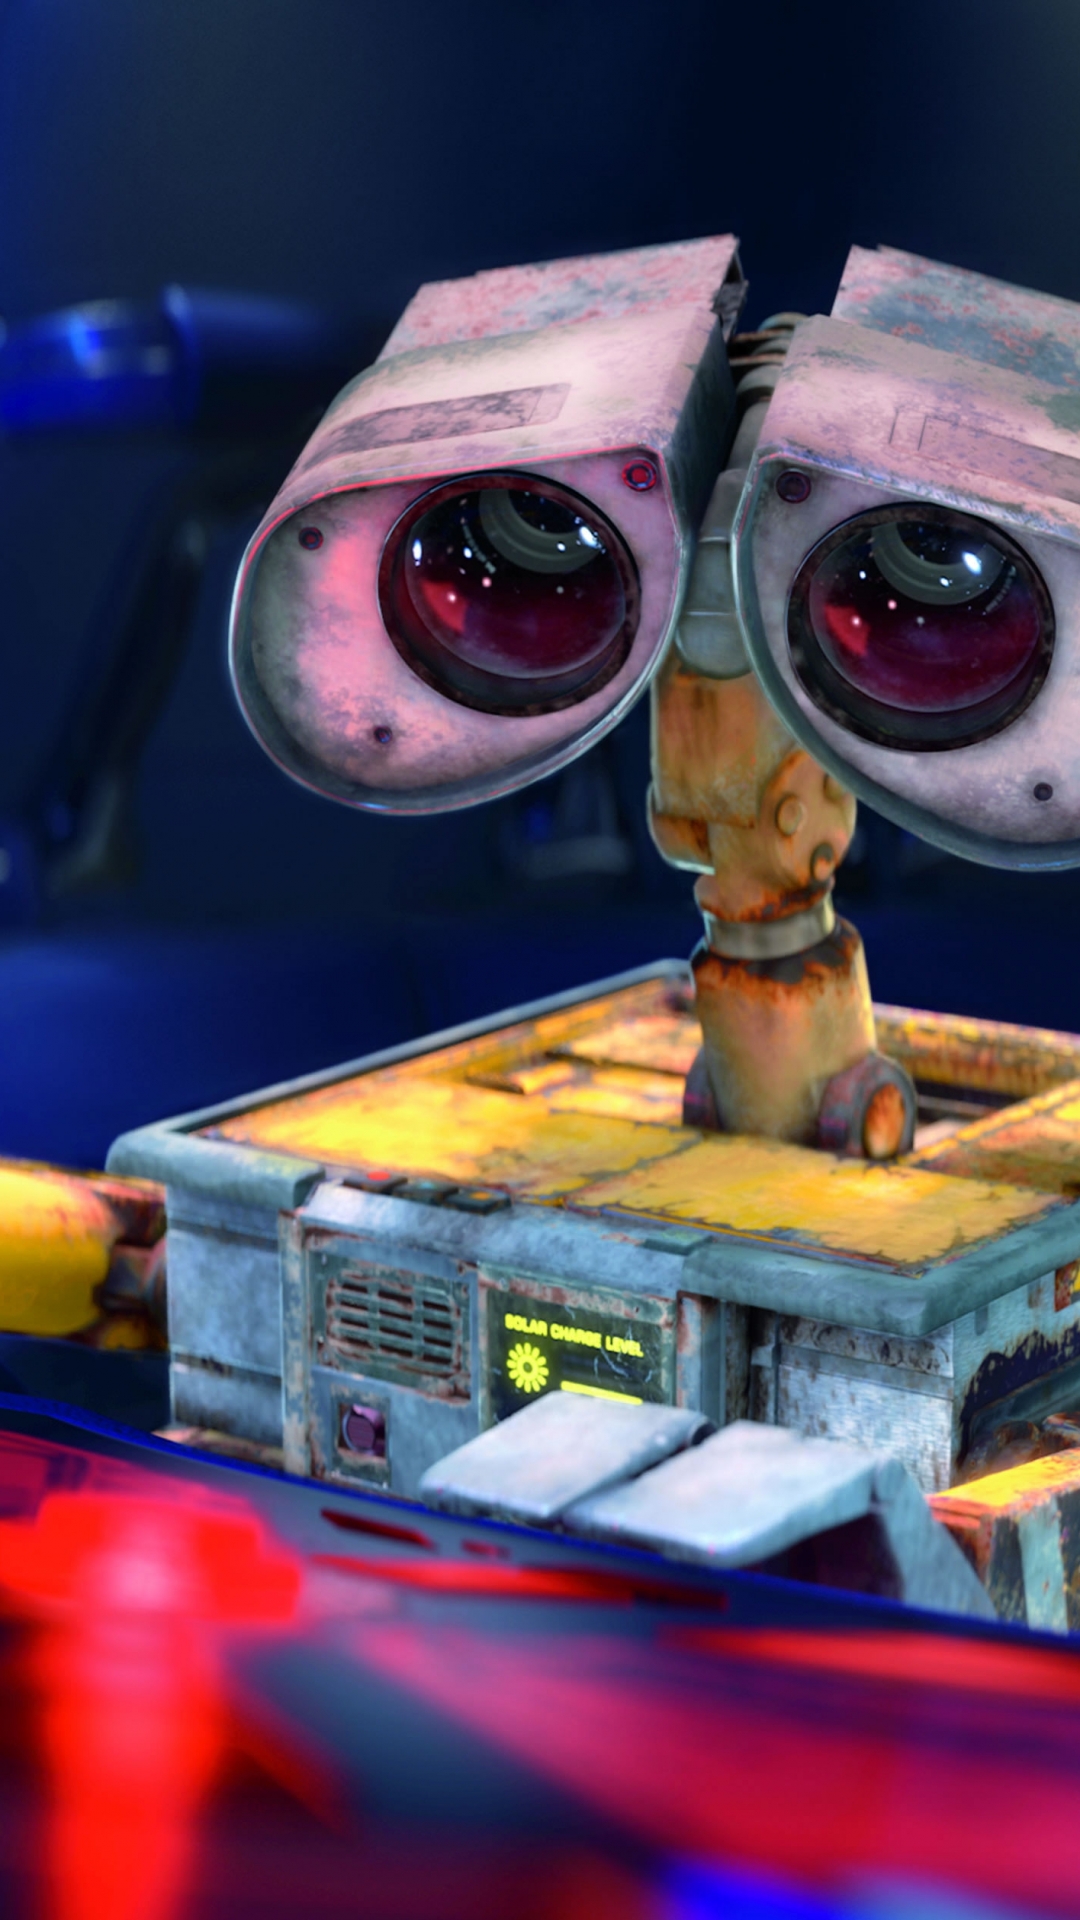 Wall E 2008 Sony Xperia X XZ Z5 Premium HD 4k Imag iPhone Wallpapers  Free Download